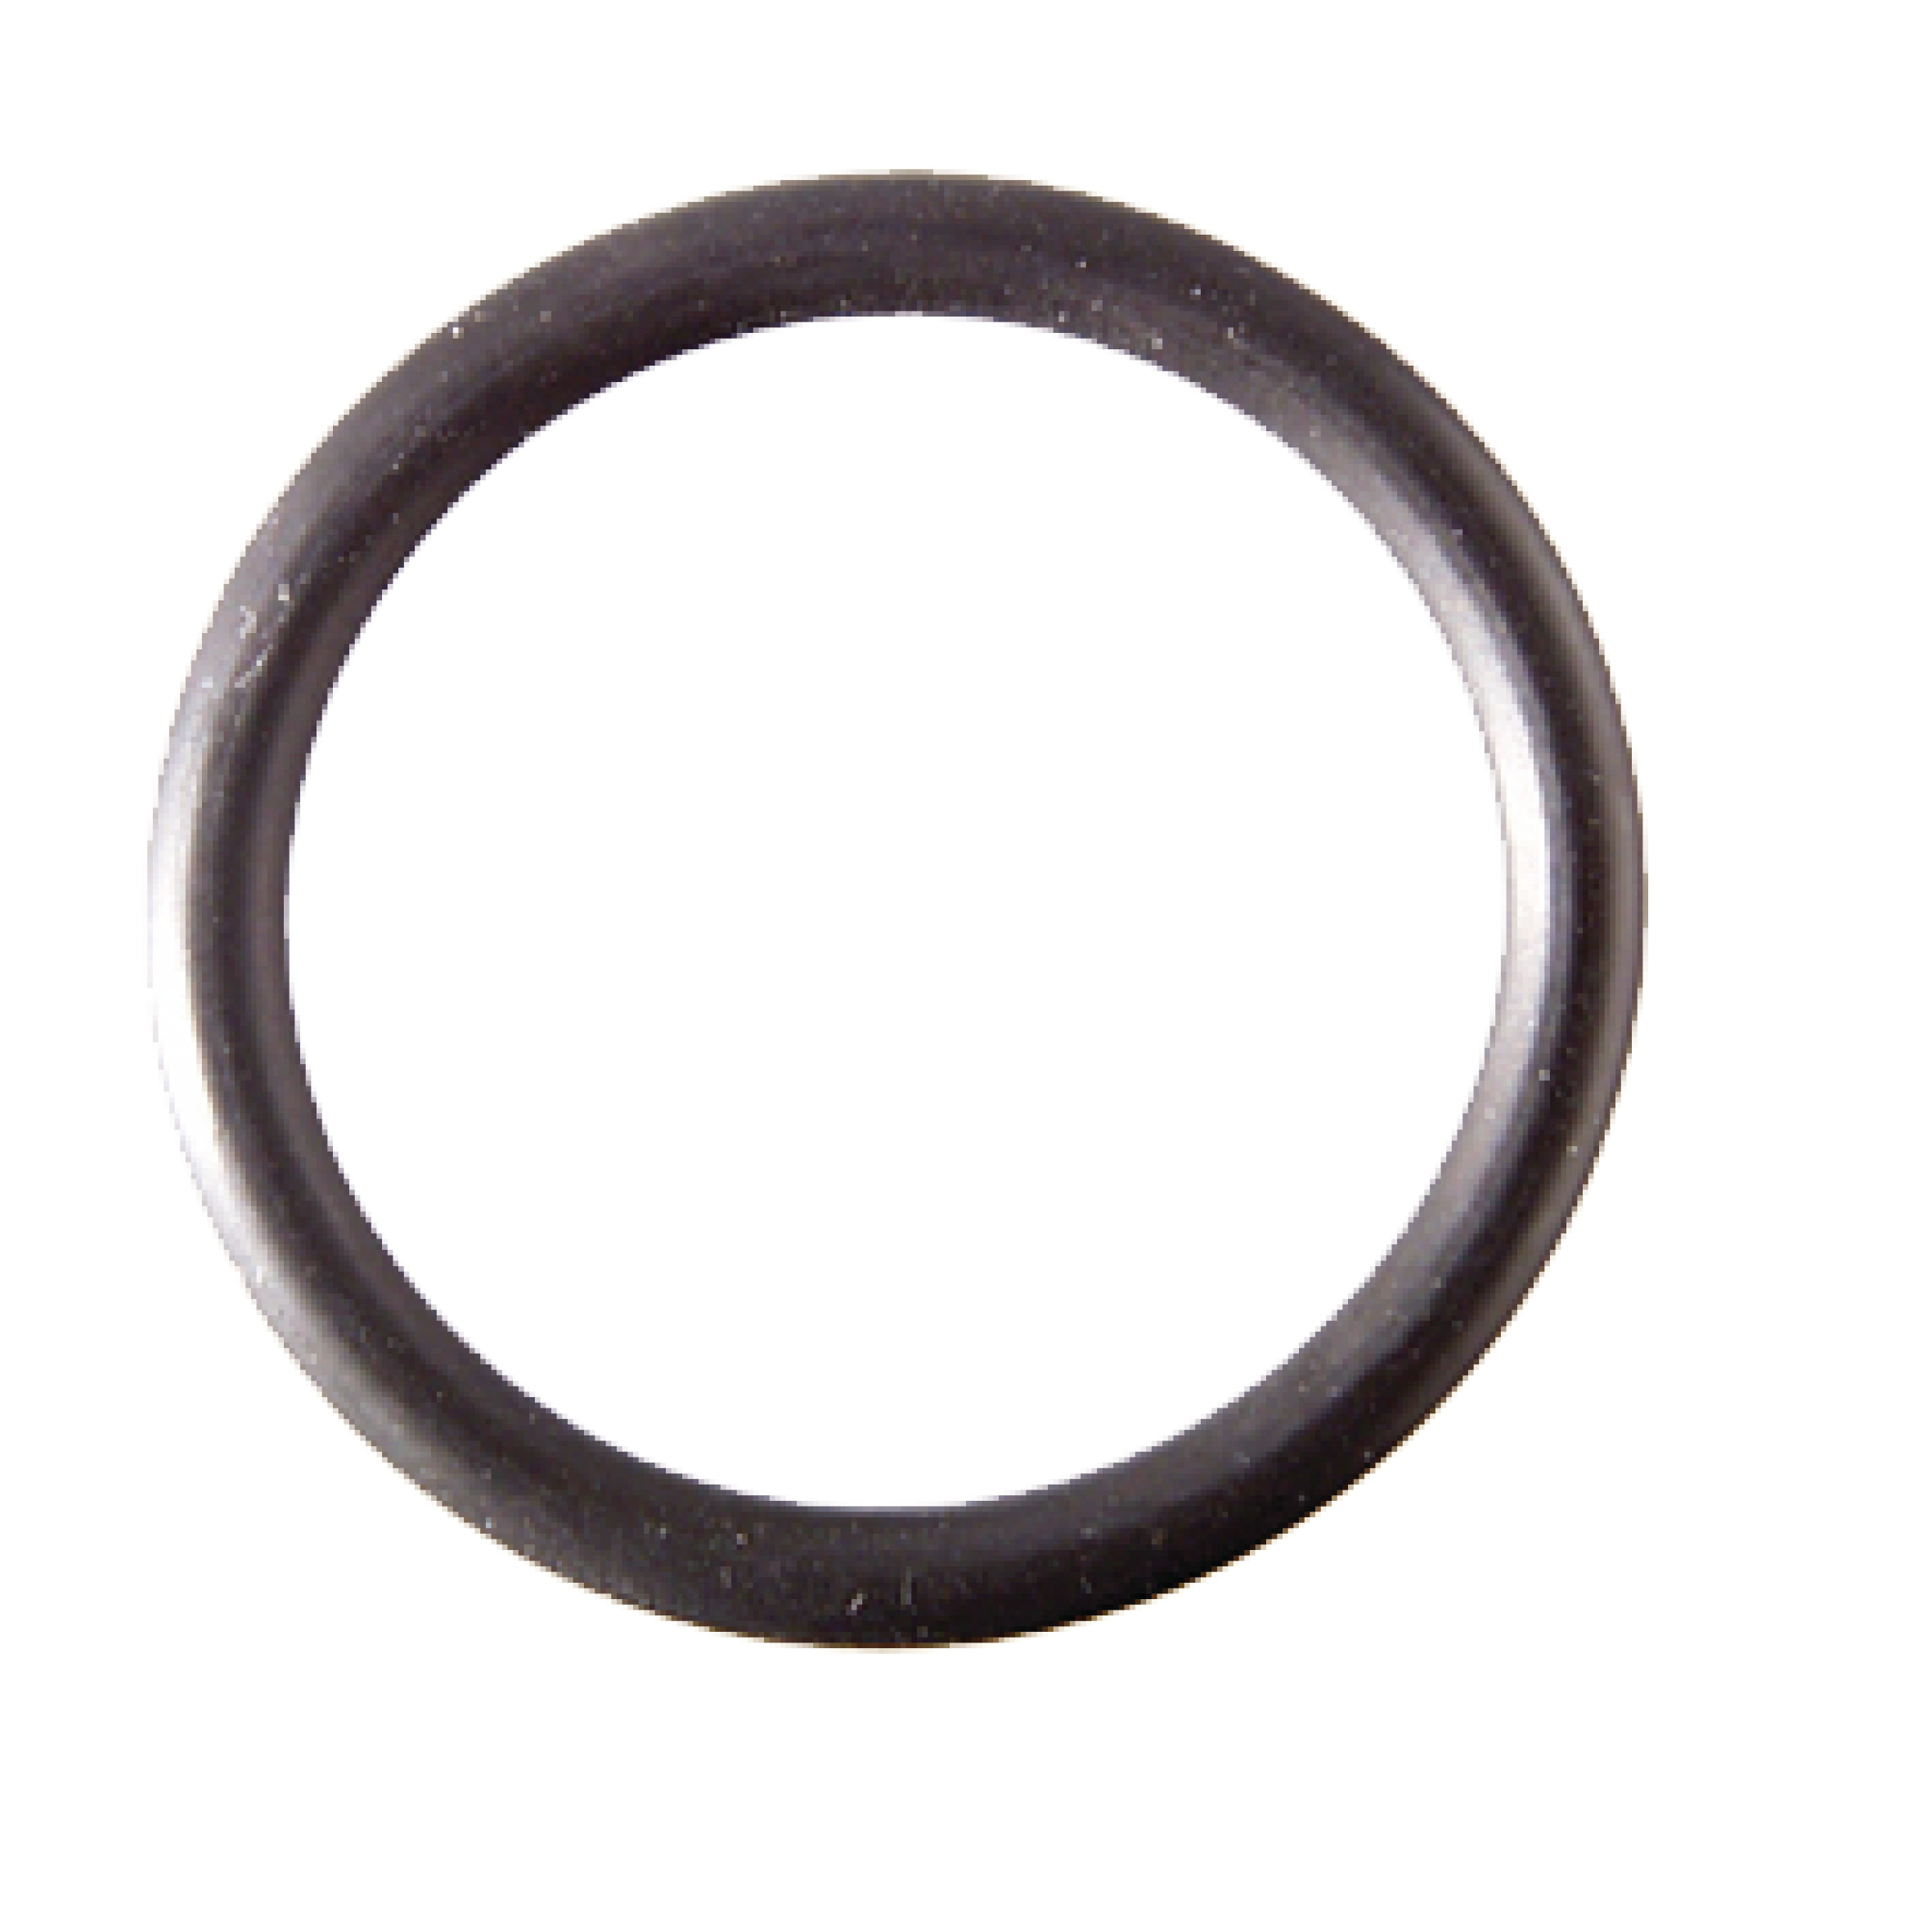   O-RING F.WT EXCENTERSTOPFEN